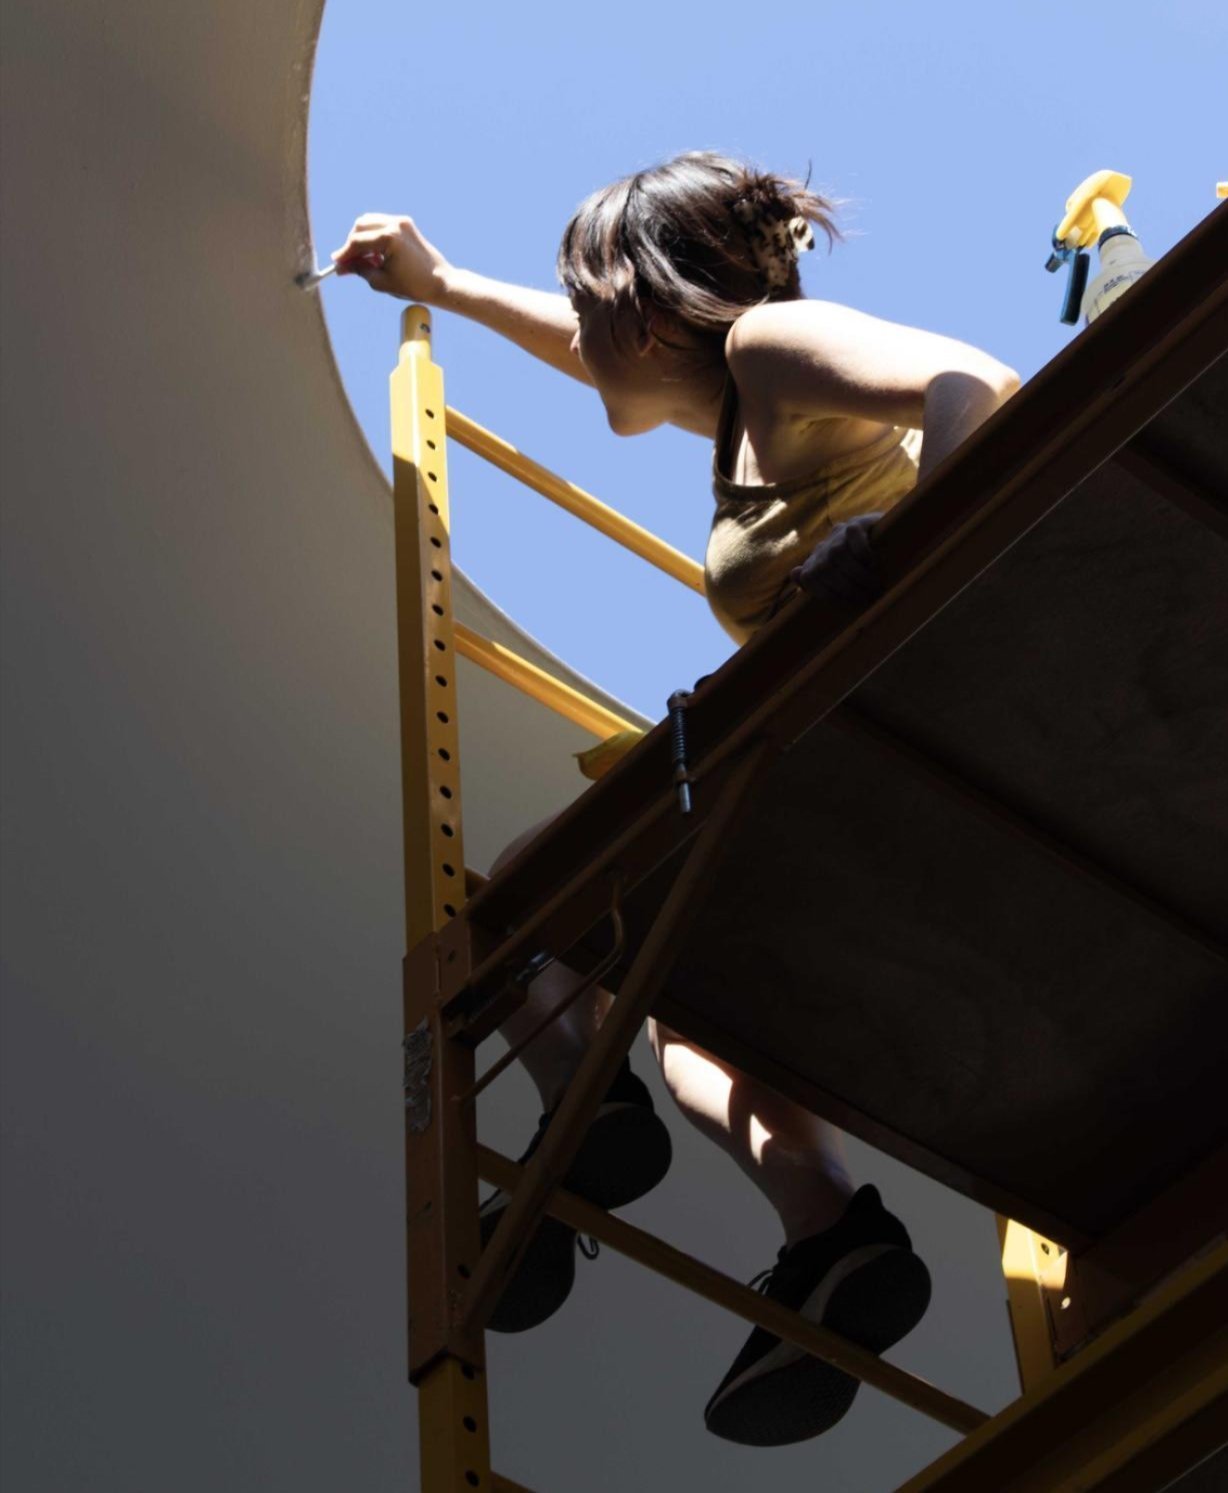 Conservator Meaghan Perry on scaffolding cleaning the oculus edge of James Turrell's 